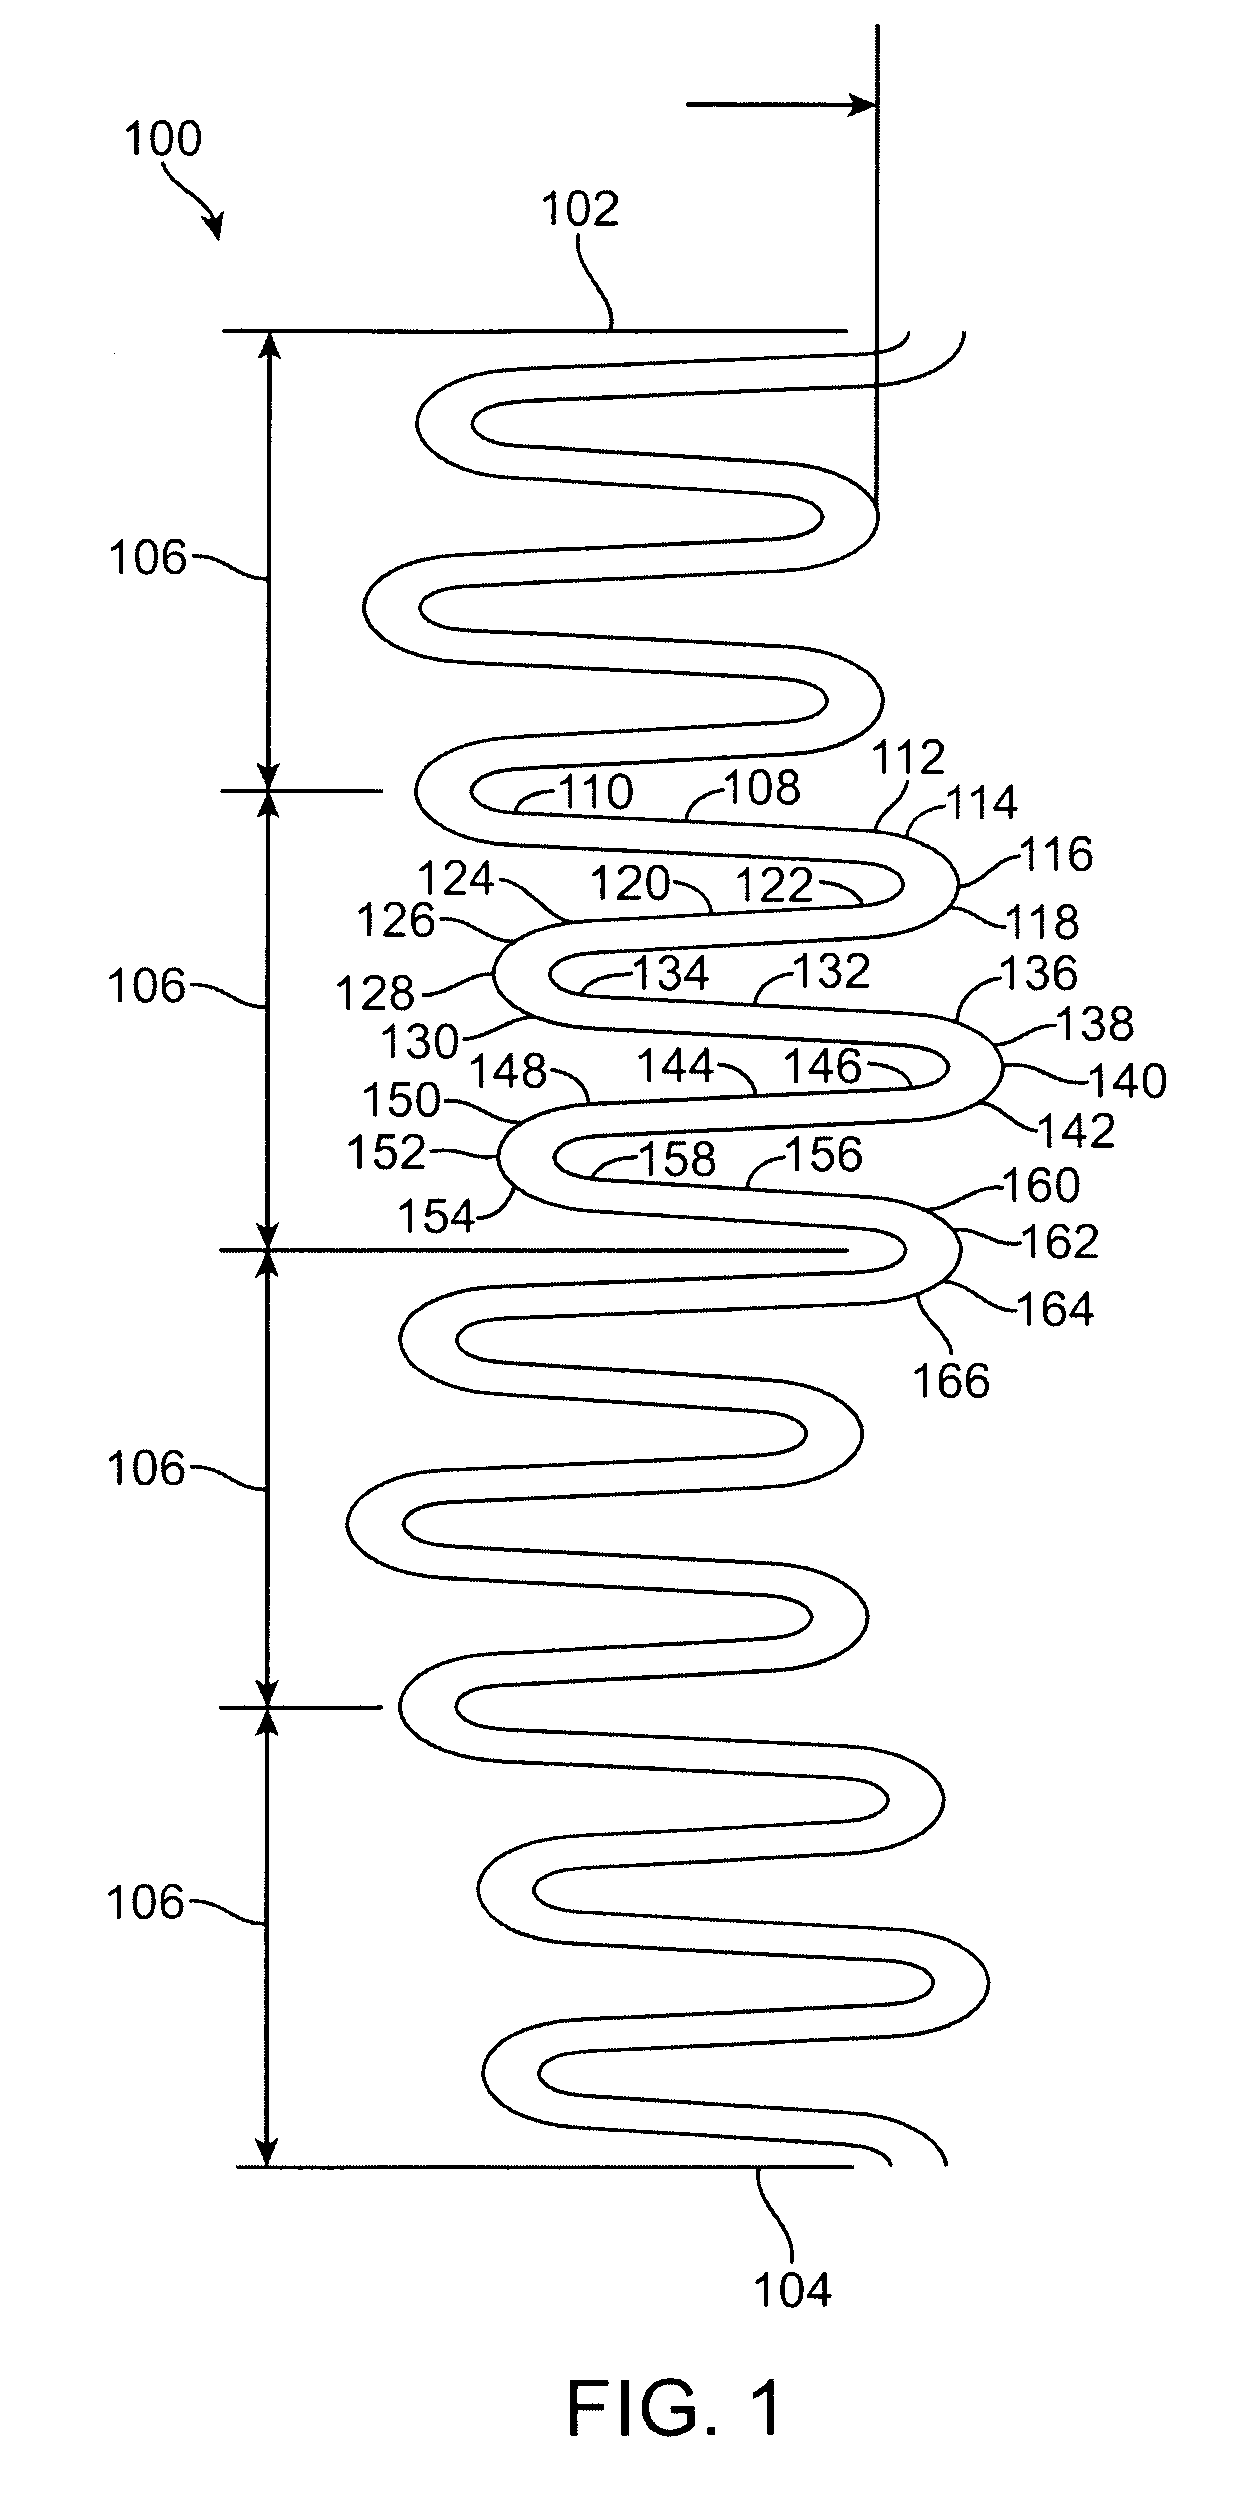 Intraluminal flexible stent device